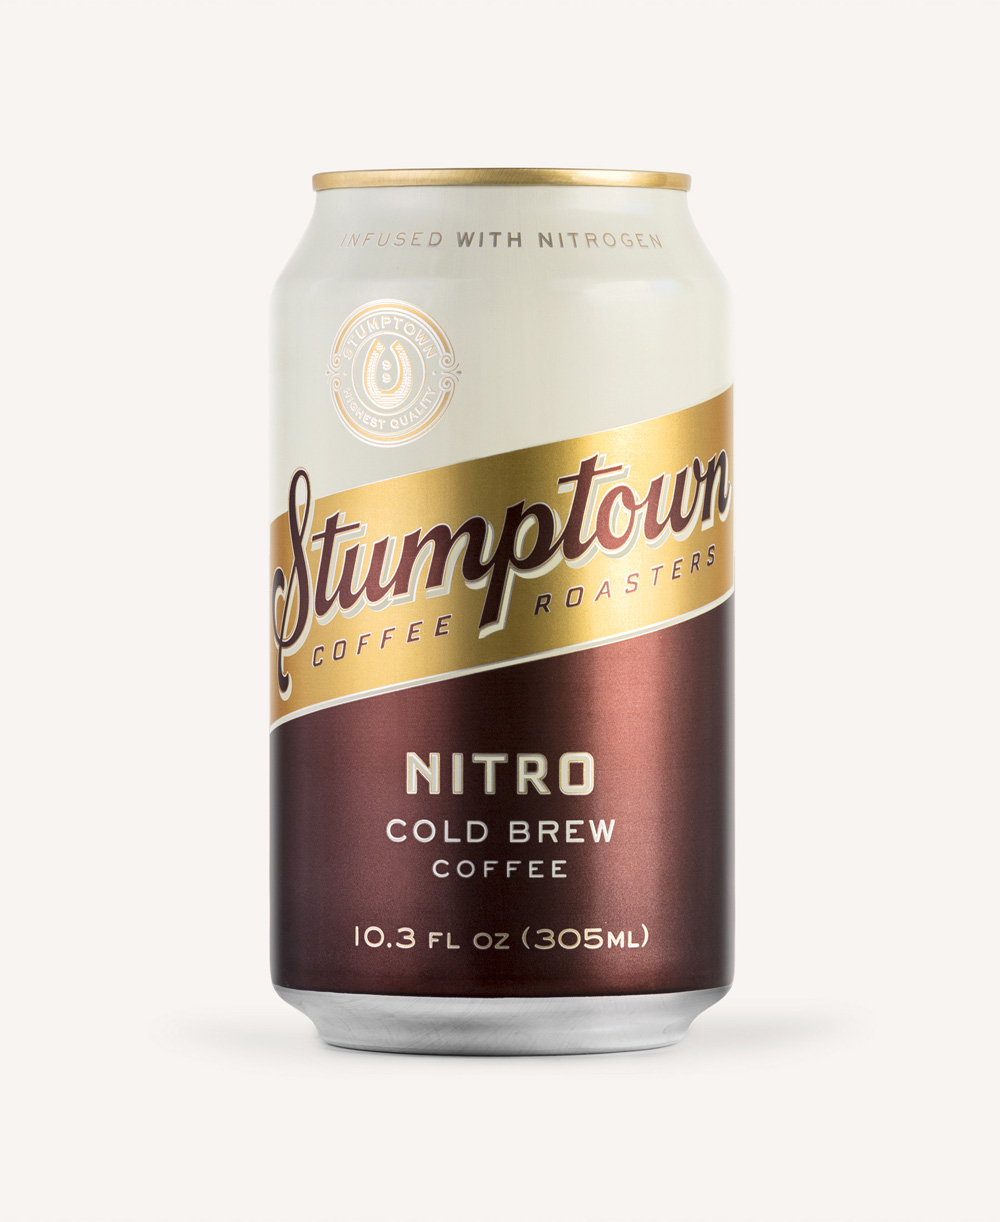 New Logo and Packaging for Stumptown Cold Brew by Column